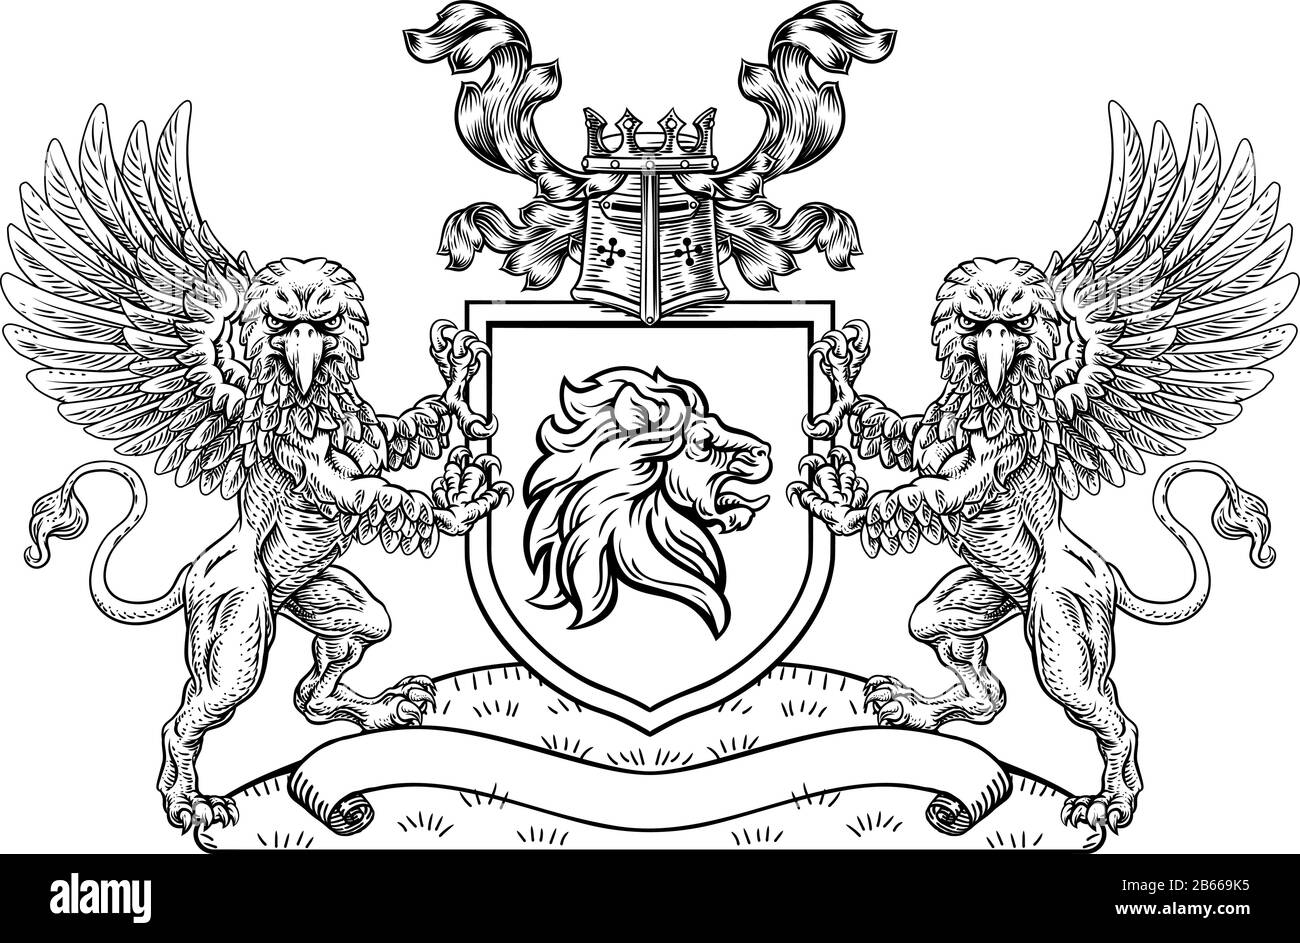 Coat of Arms Crest Lion Griffin or Griffon Shield Stock Vector